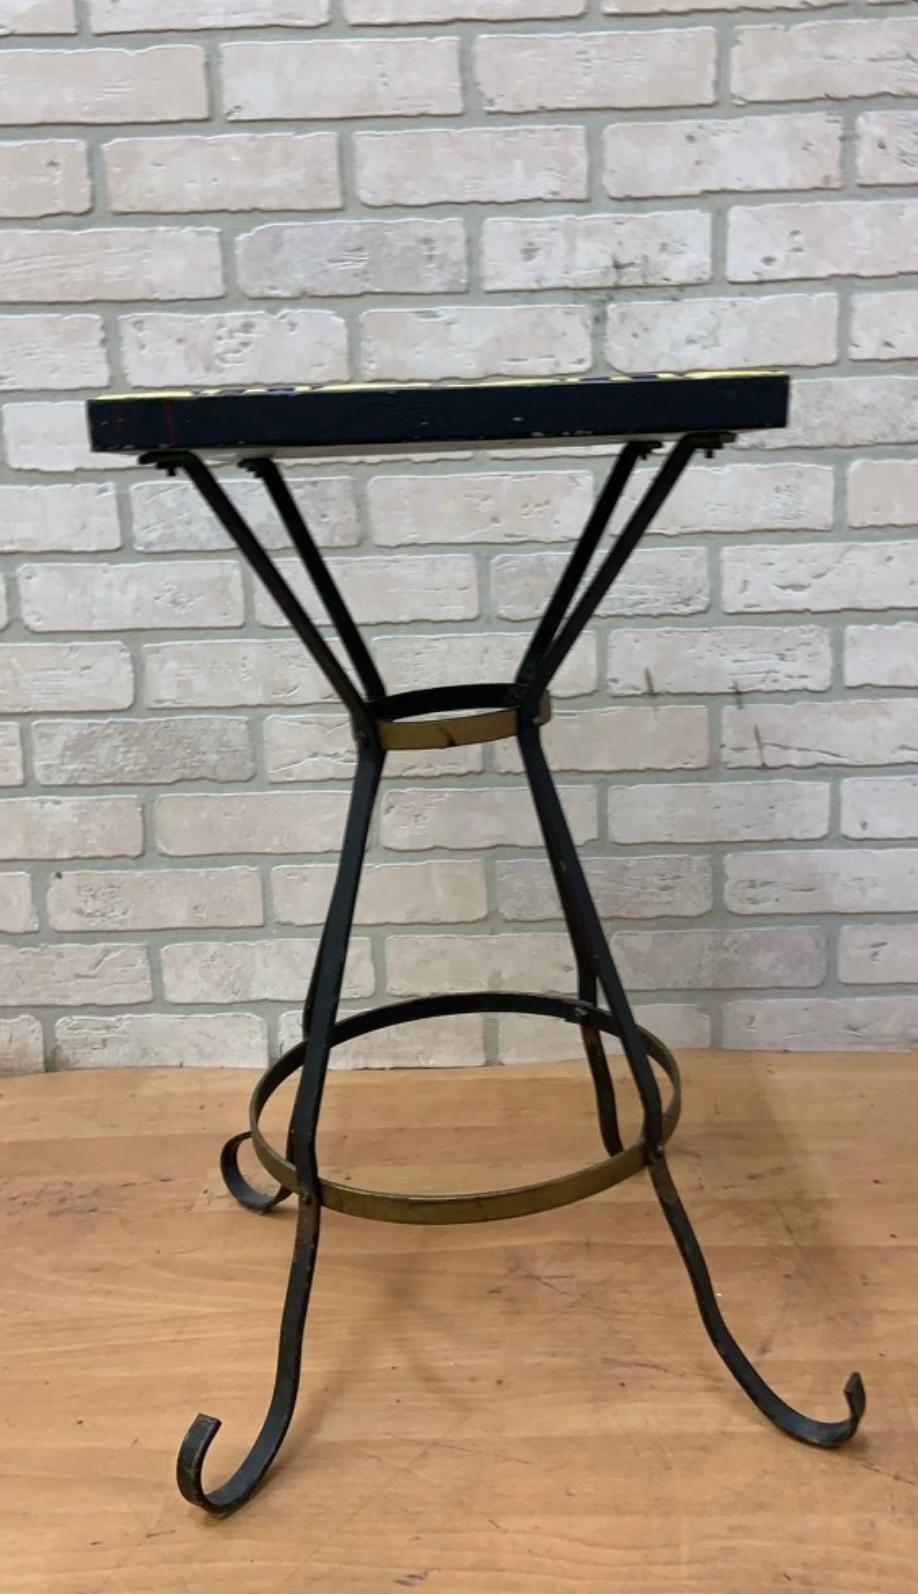 Ceramic Vintage Wrought Iron Tile Top Accent Table For Sale